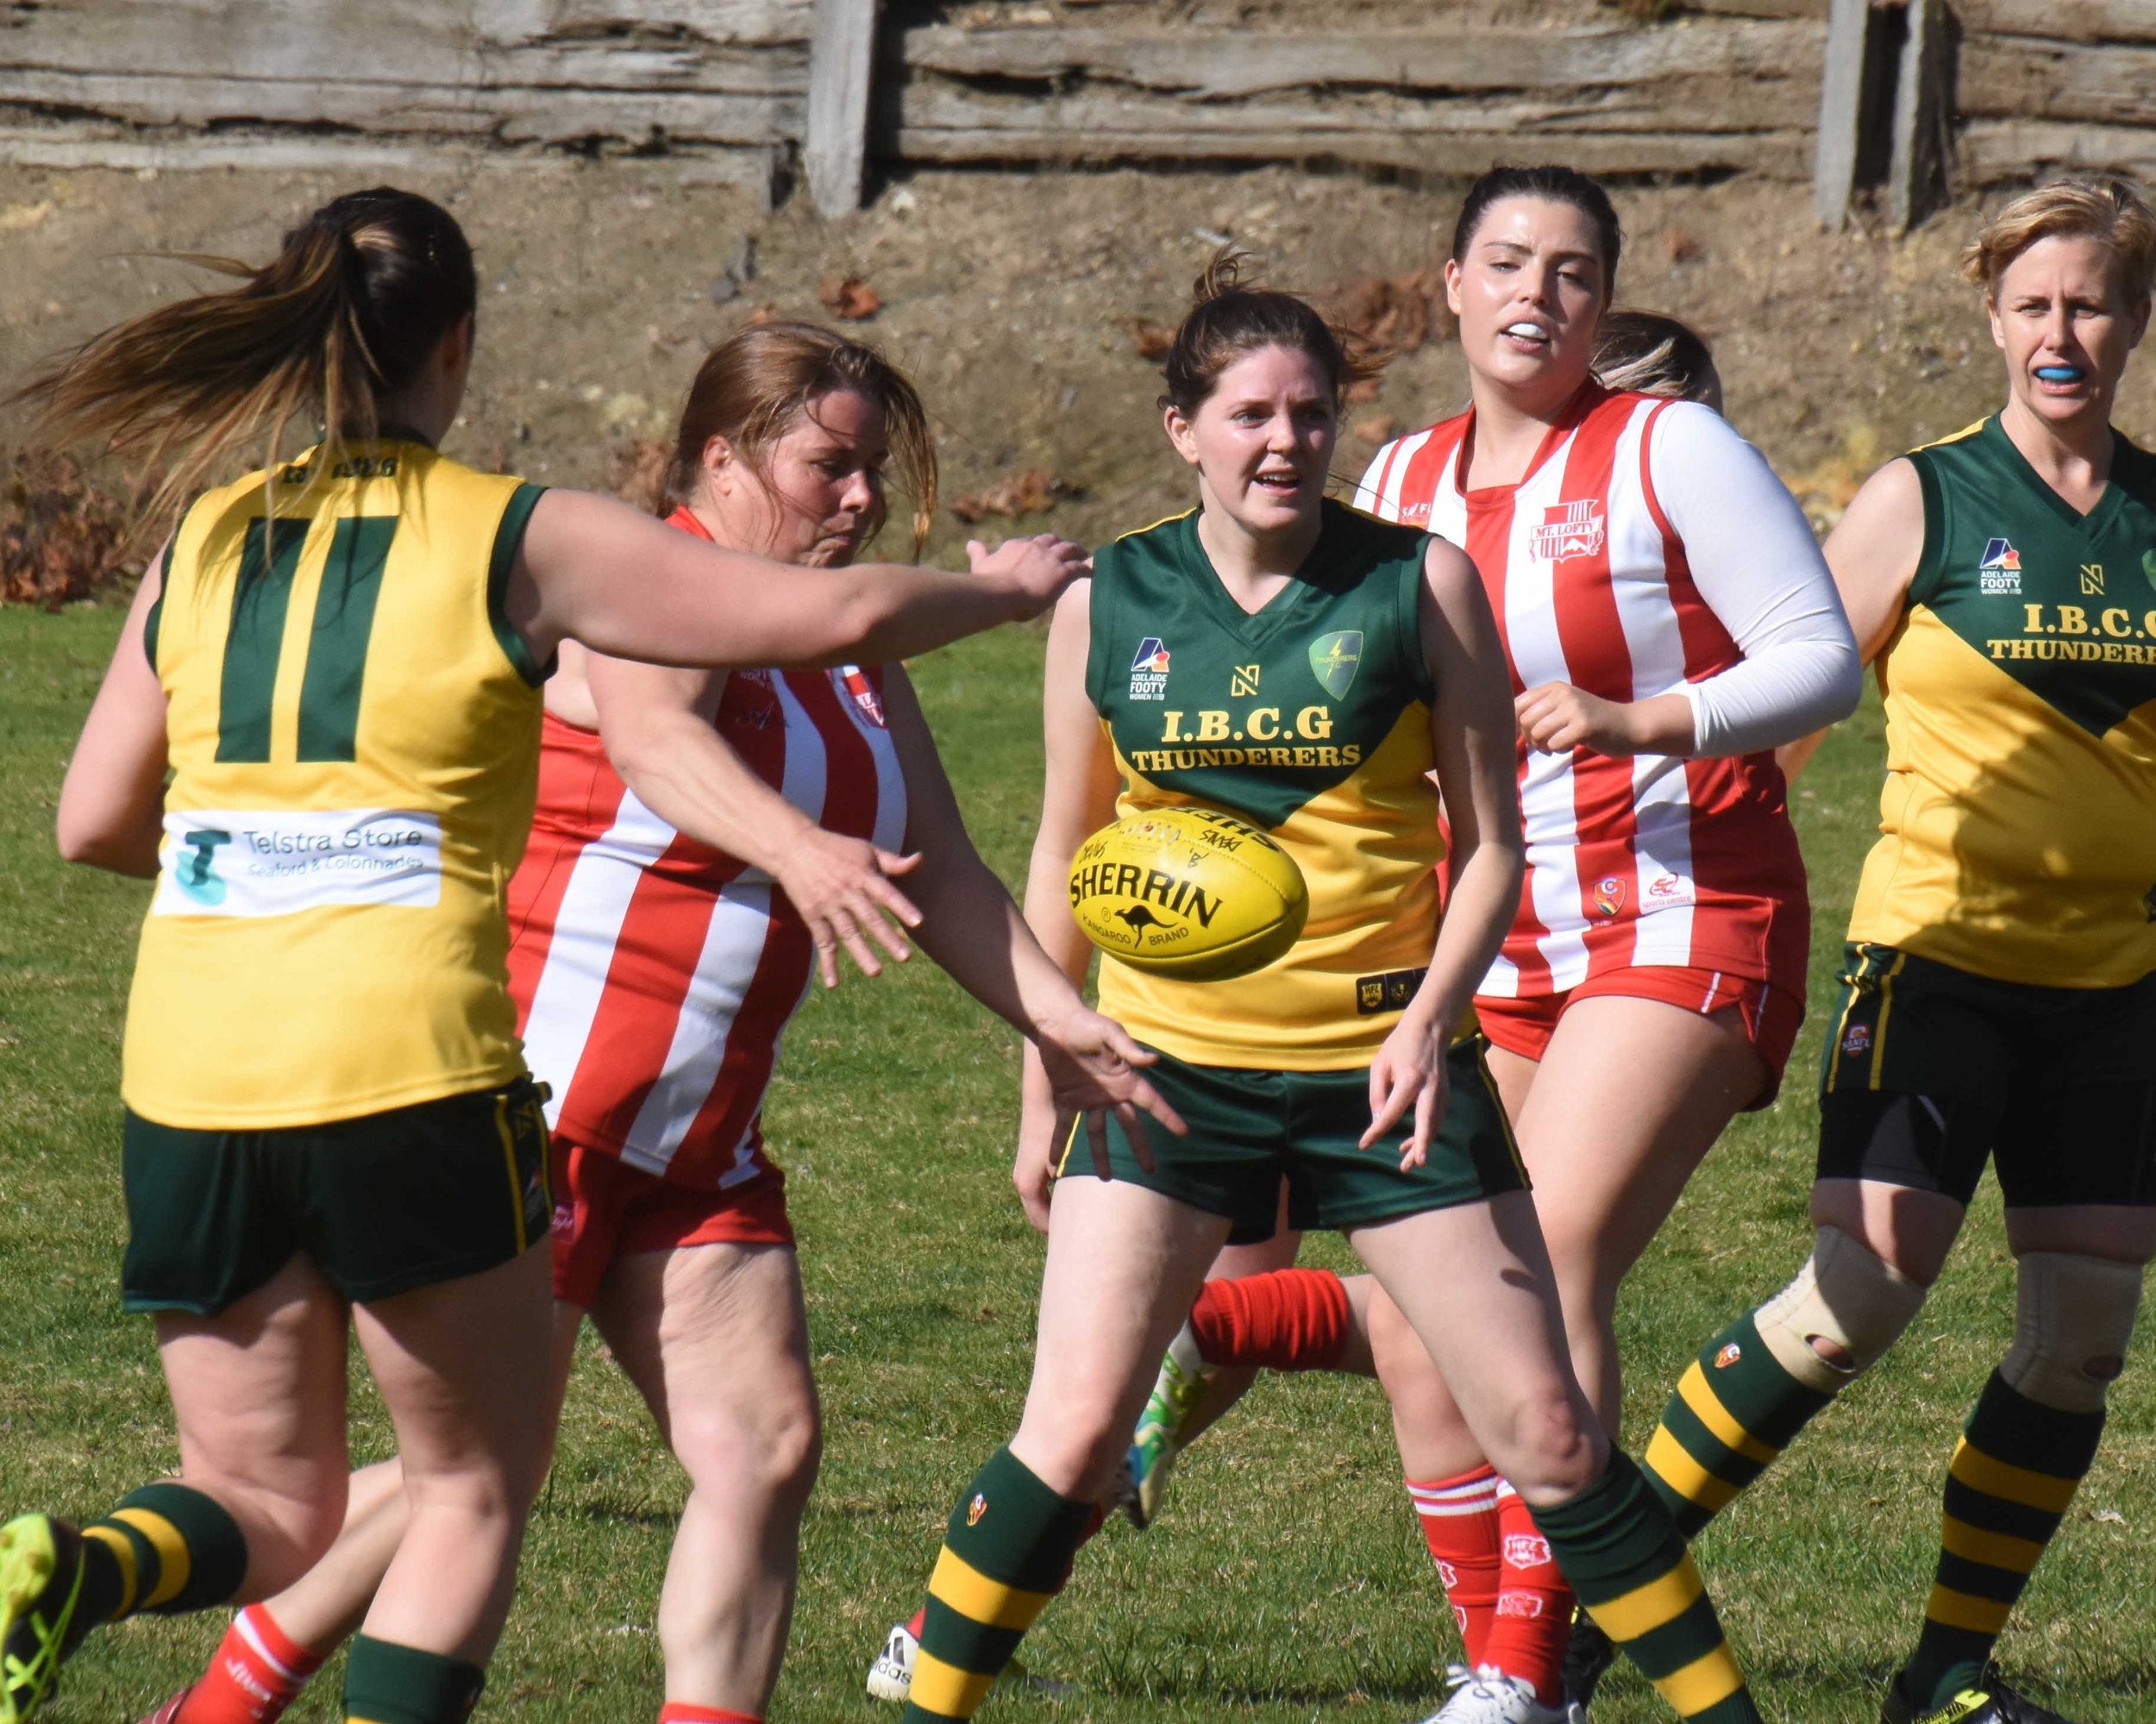 Mt Lofty game photo for Courier.jpg